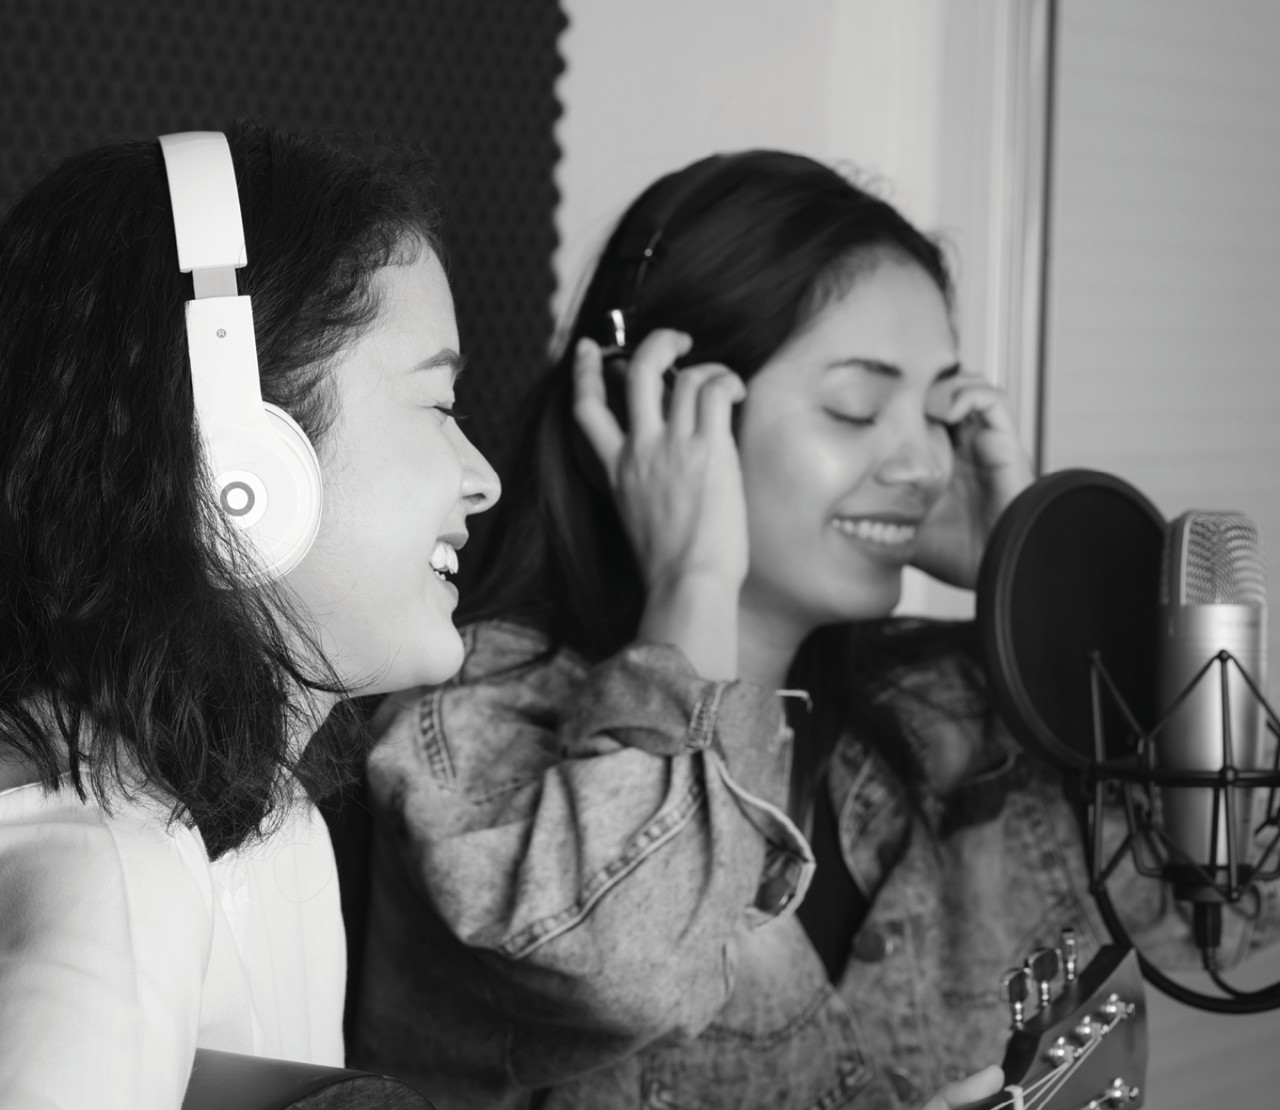 Two people recording sound and laughing in a studio